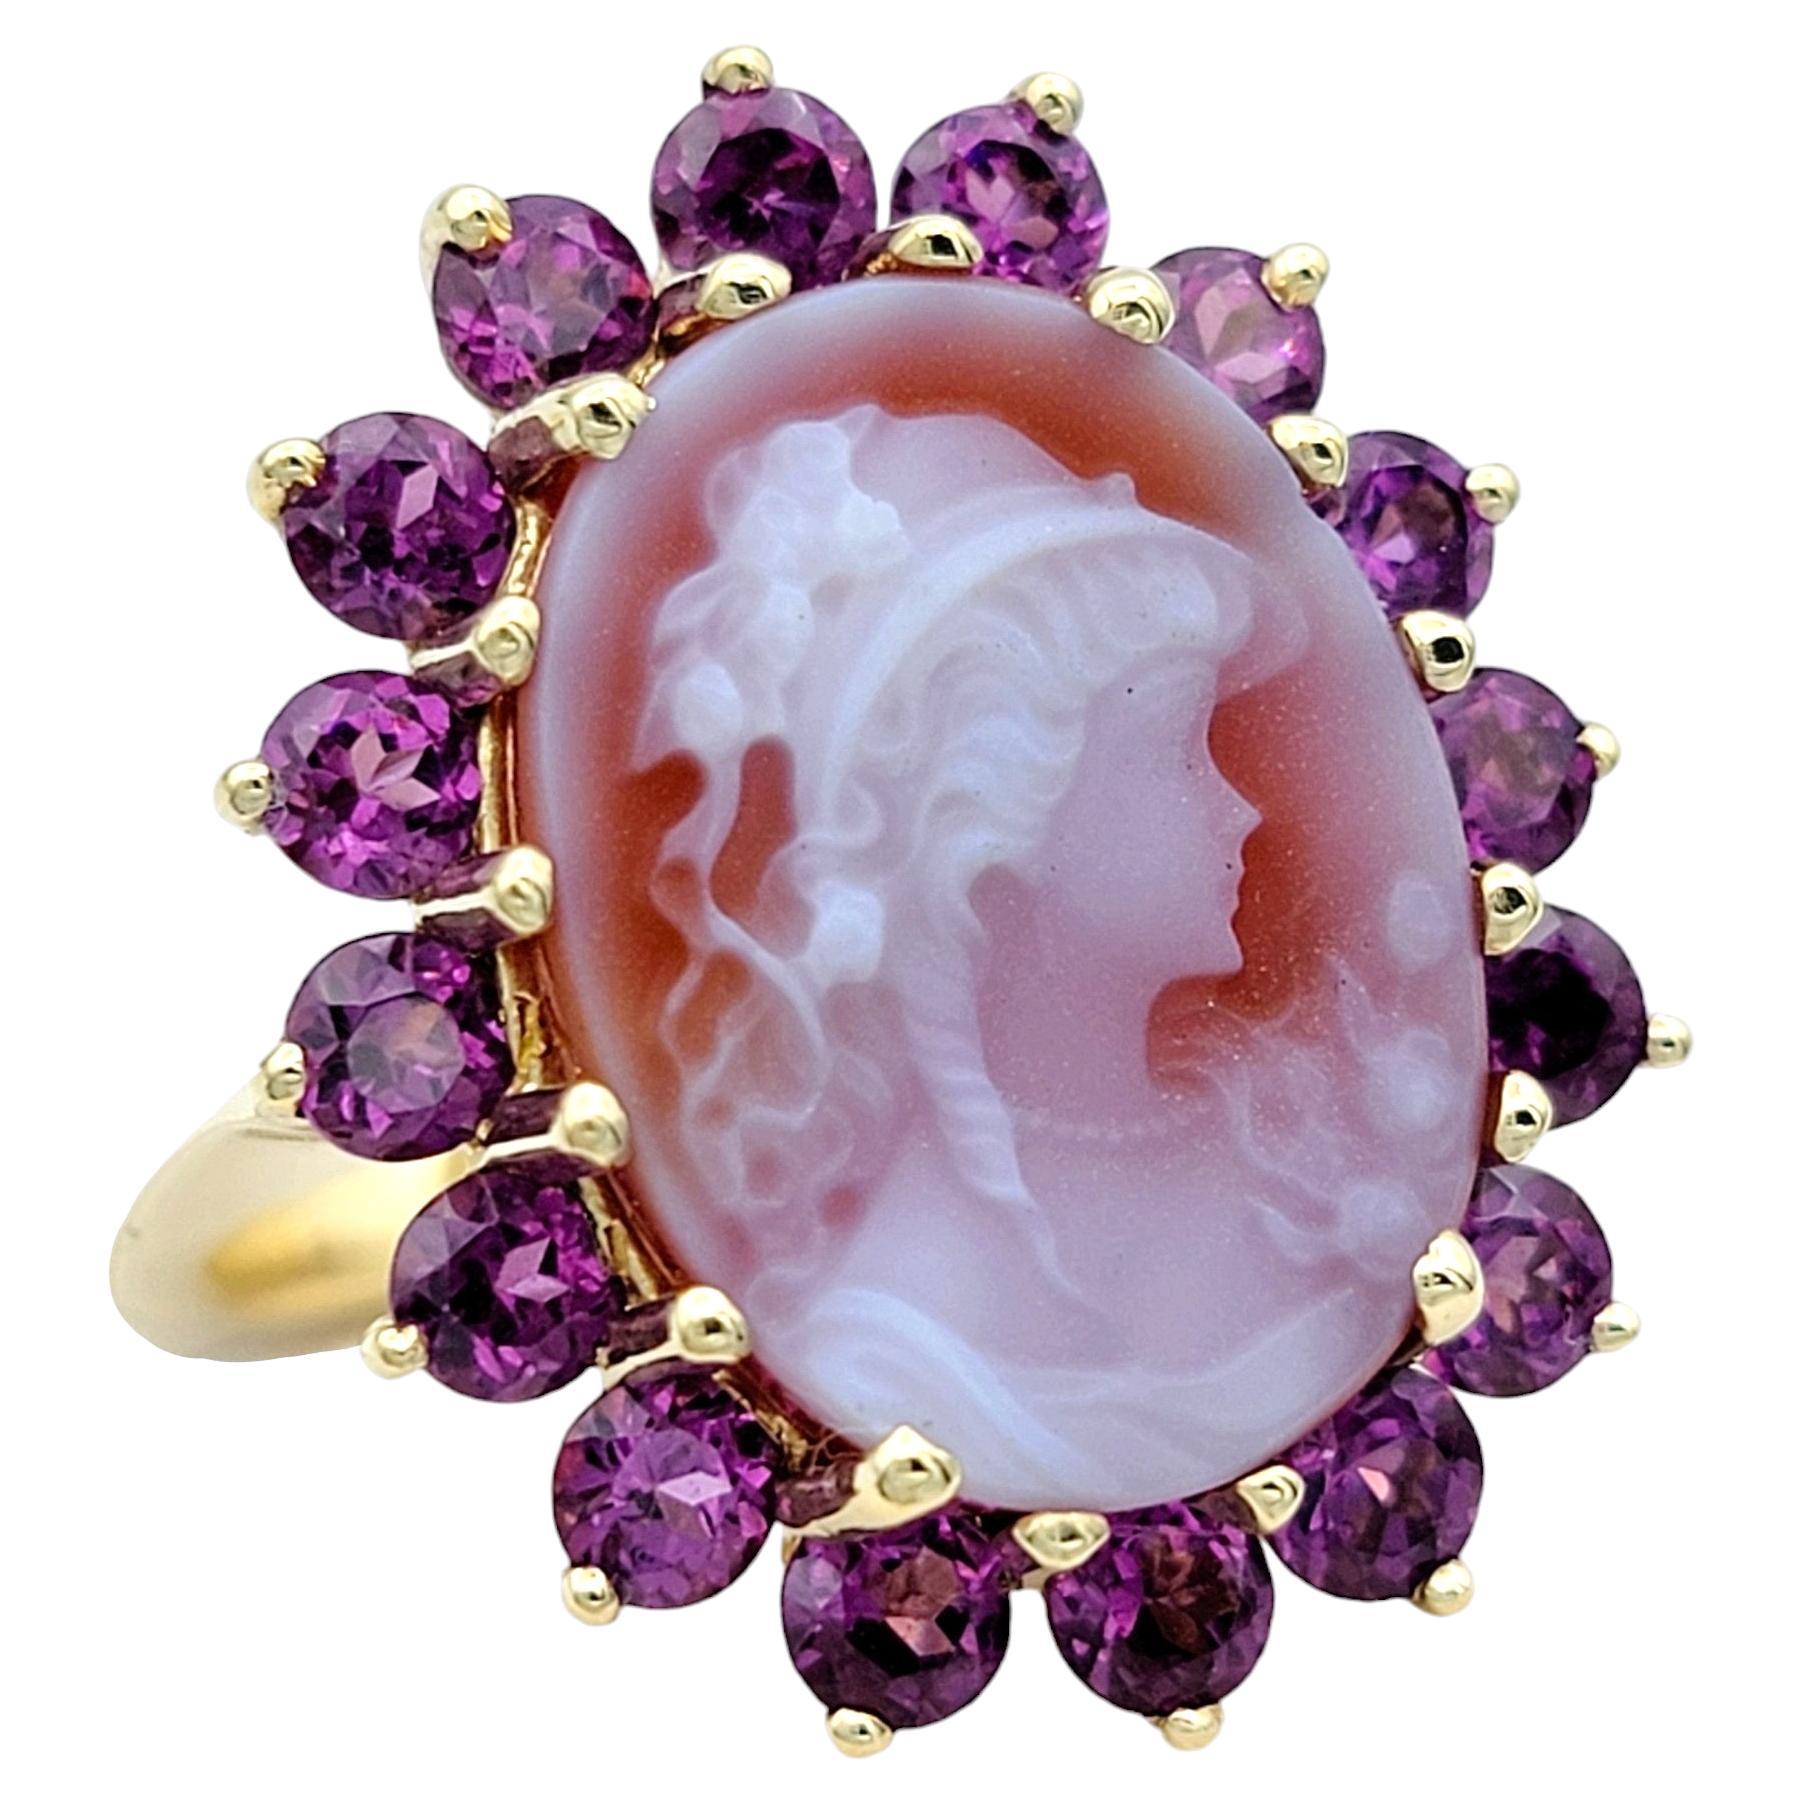 Ring Size: 6.5

This exquisite cameo ring is a testament to classical elegance, set in lustrous 14 karat yellow gold. The focal point of the ring is the intricate cameo carving, showcasing intricate details and timeless beauty of a young woman's